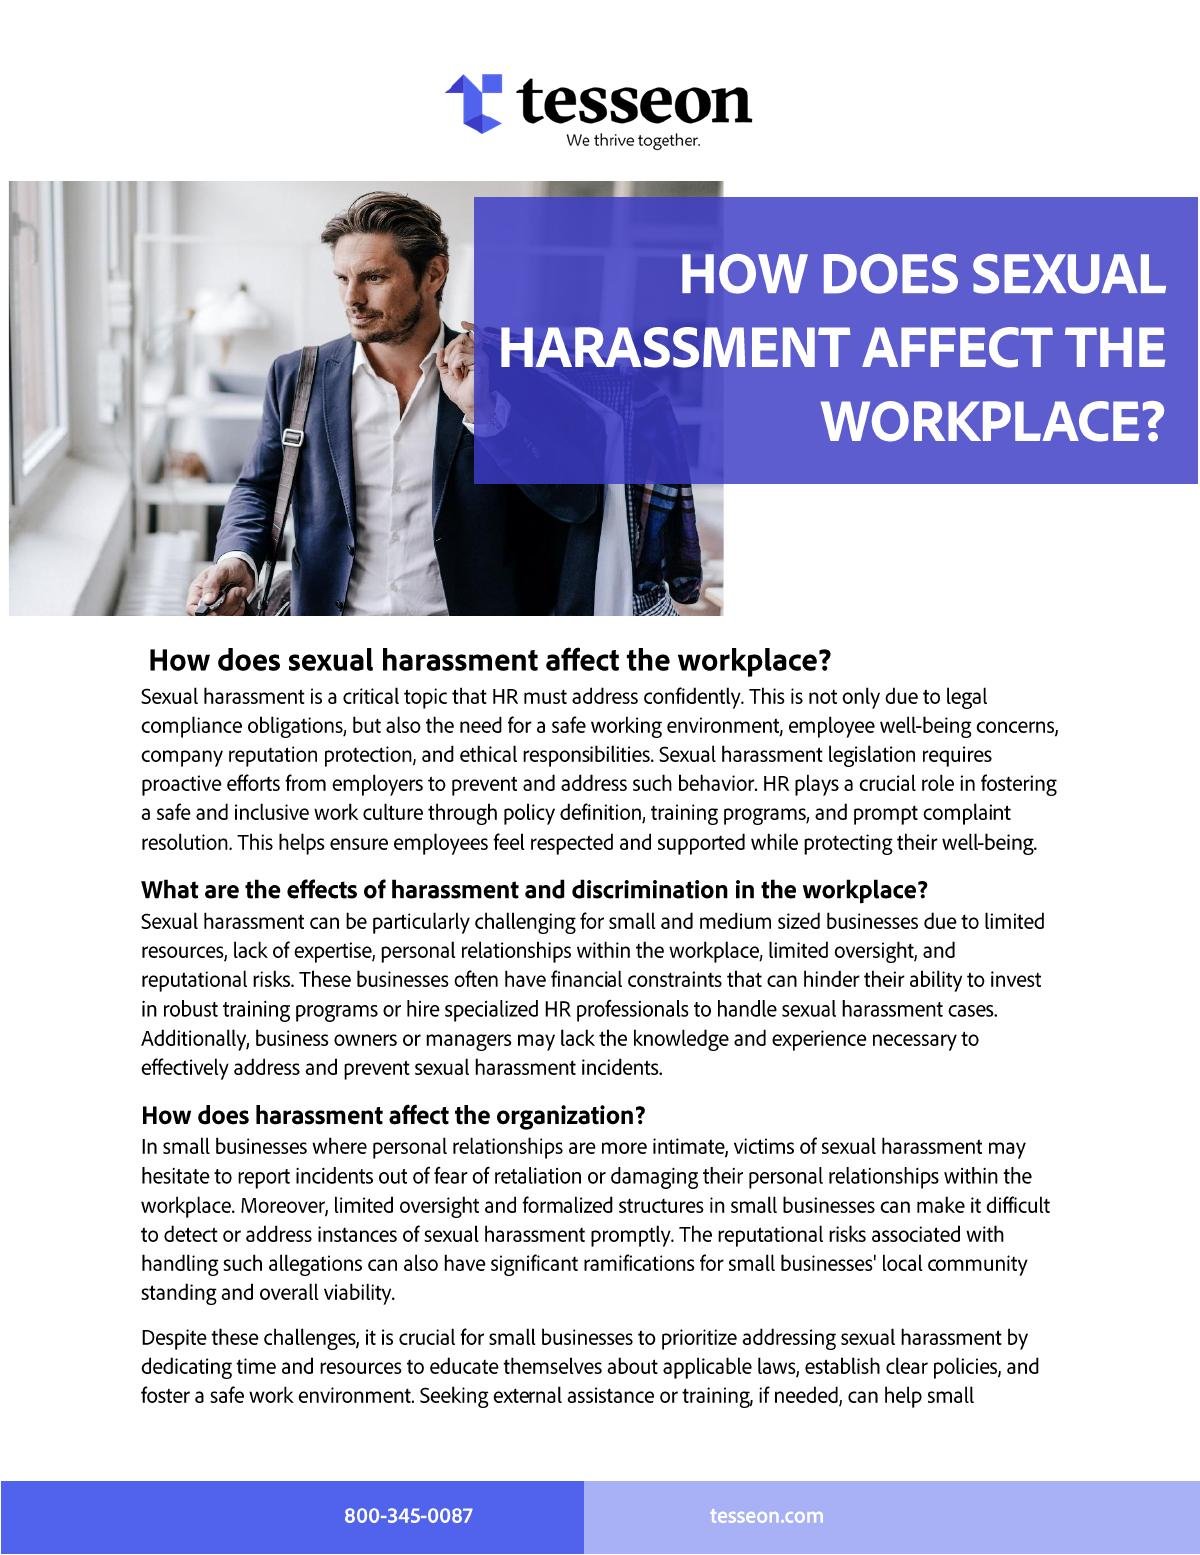 How does sexual harassment affect the workplace?